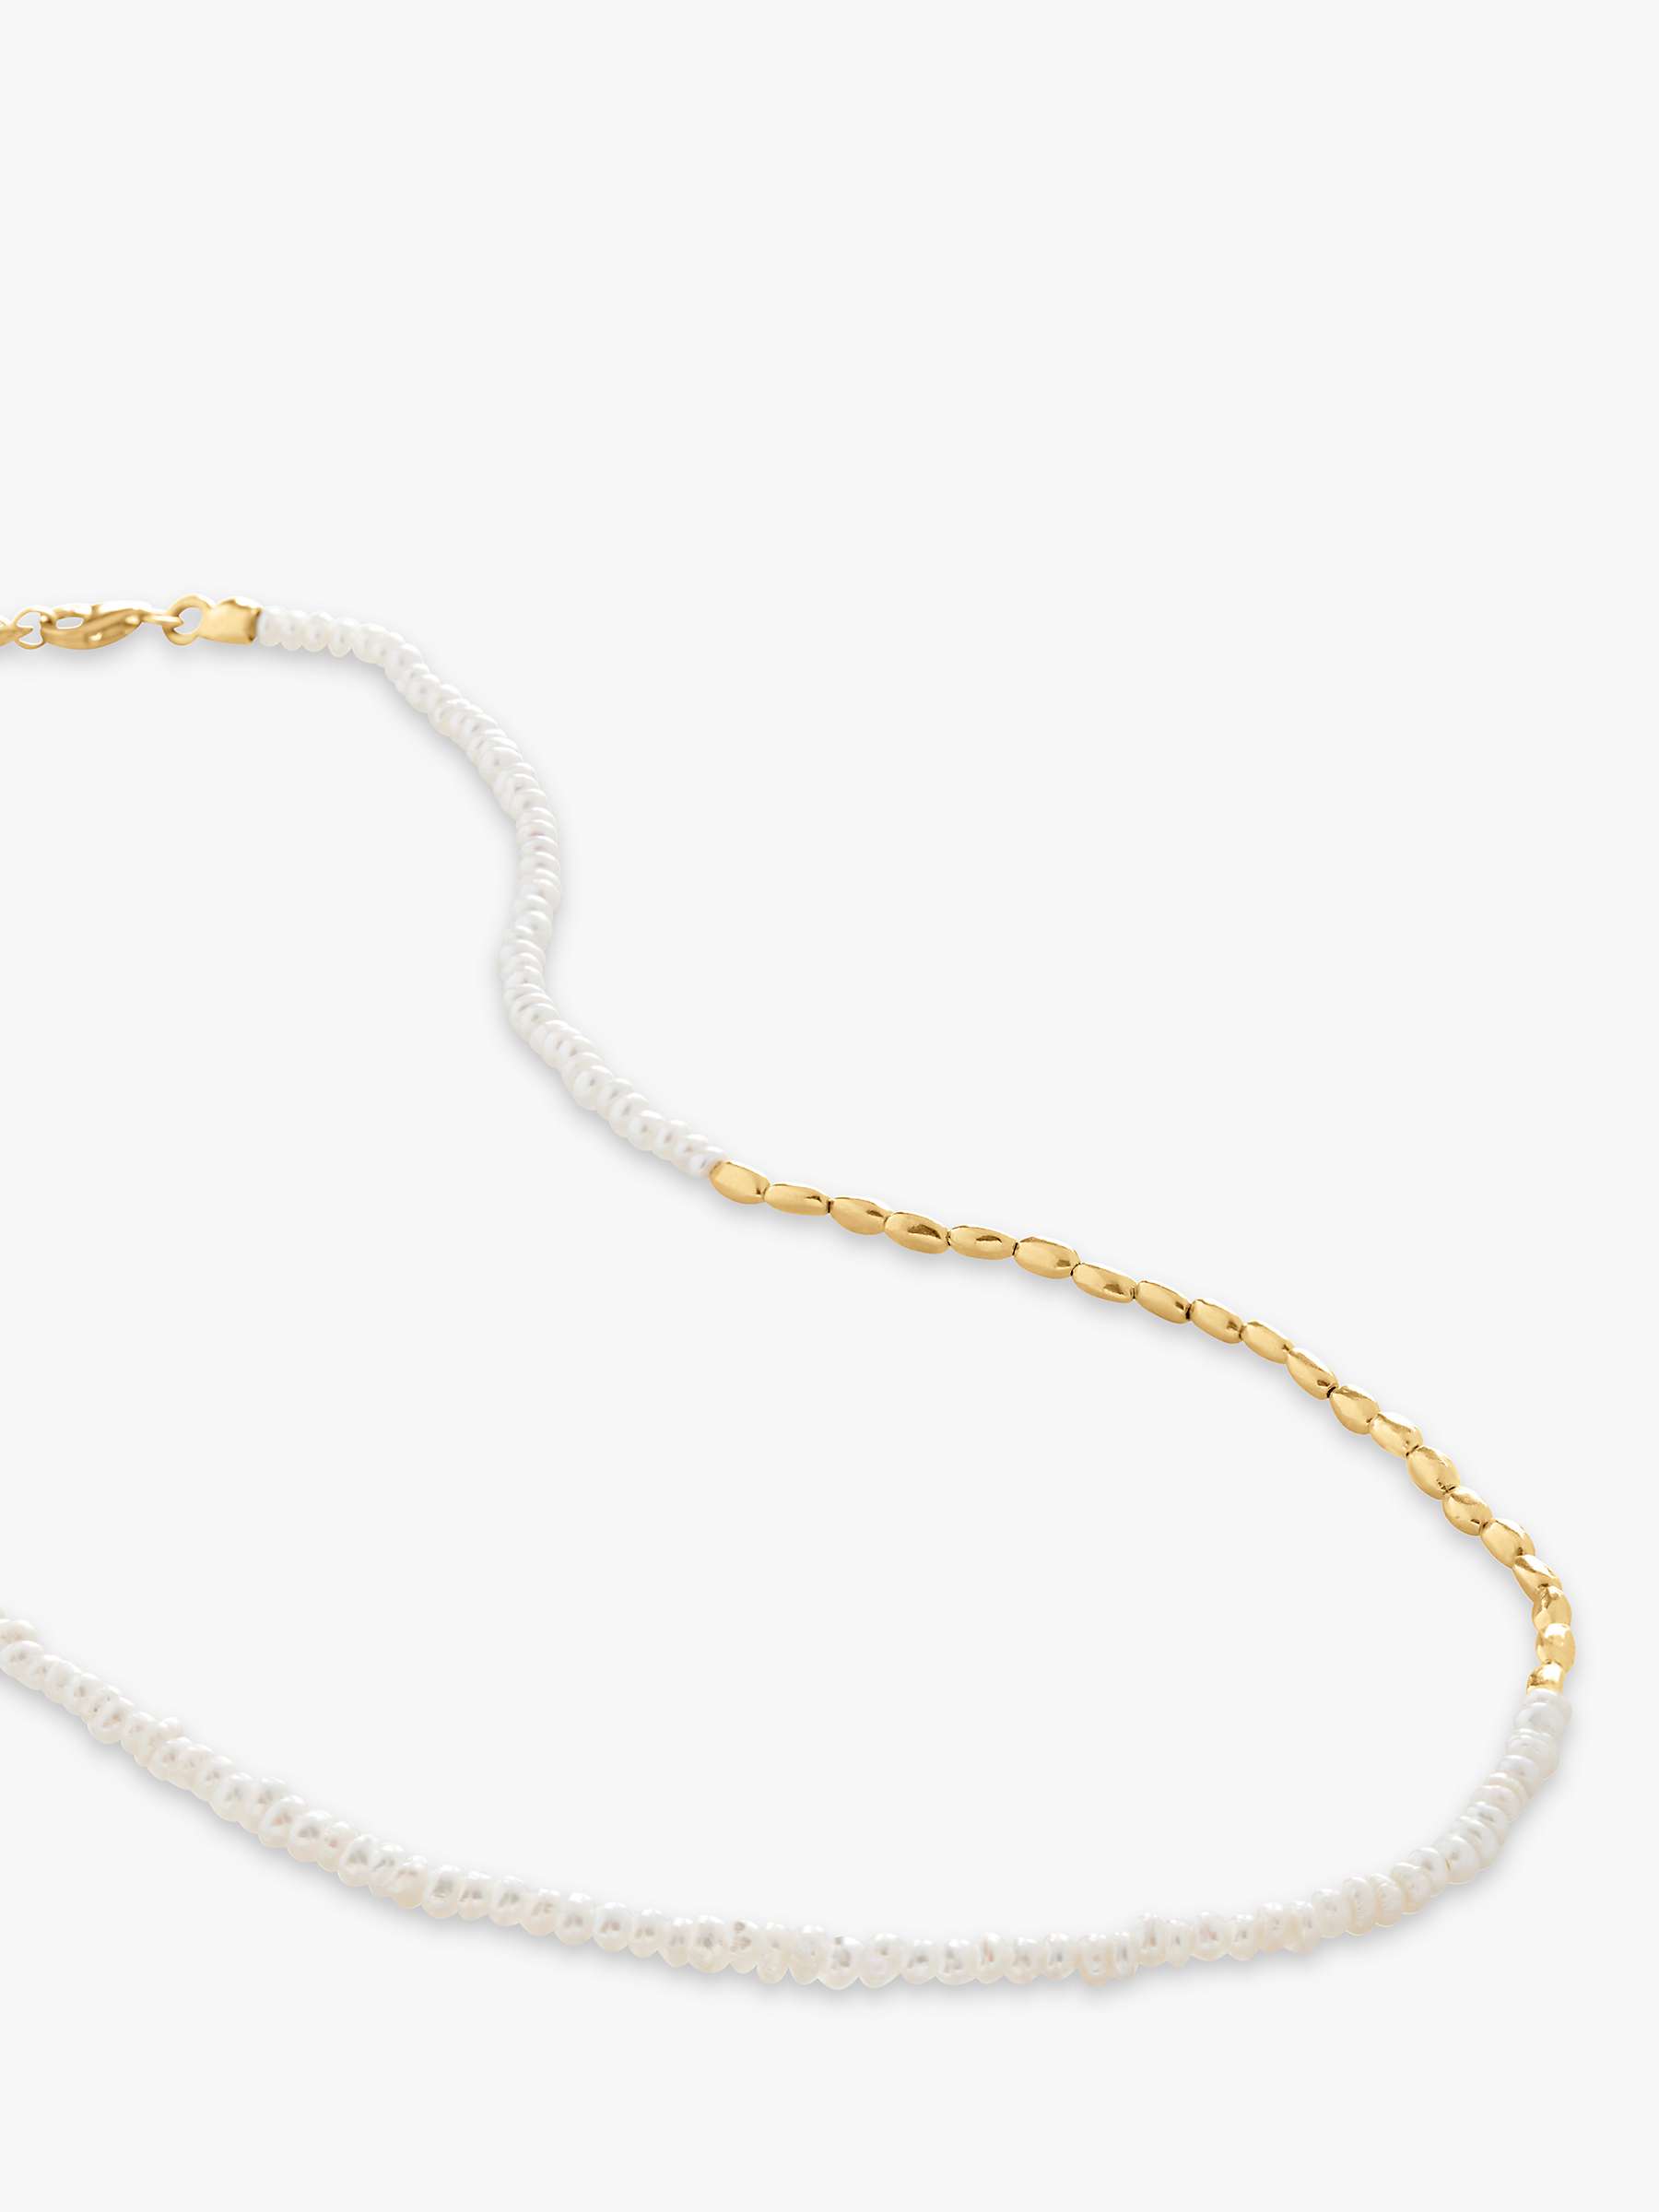 Buy Monica Vinader Mini Pearl Necklace, White/Gold Online at johnlewis.com